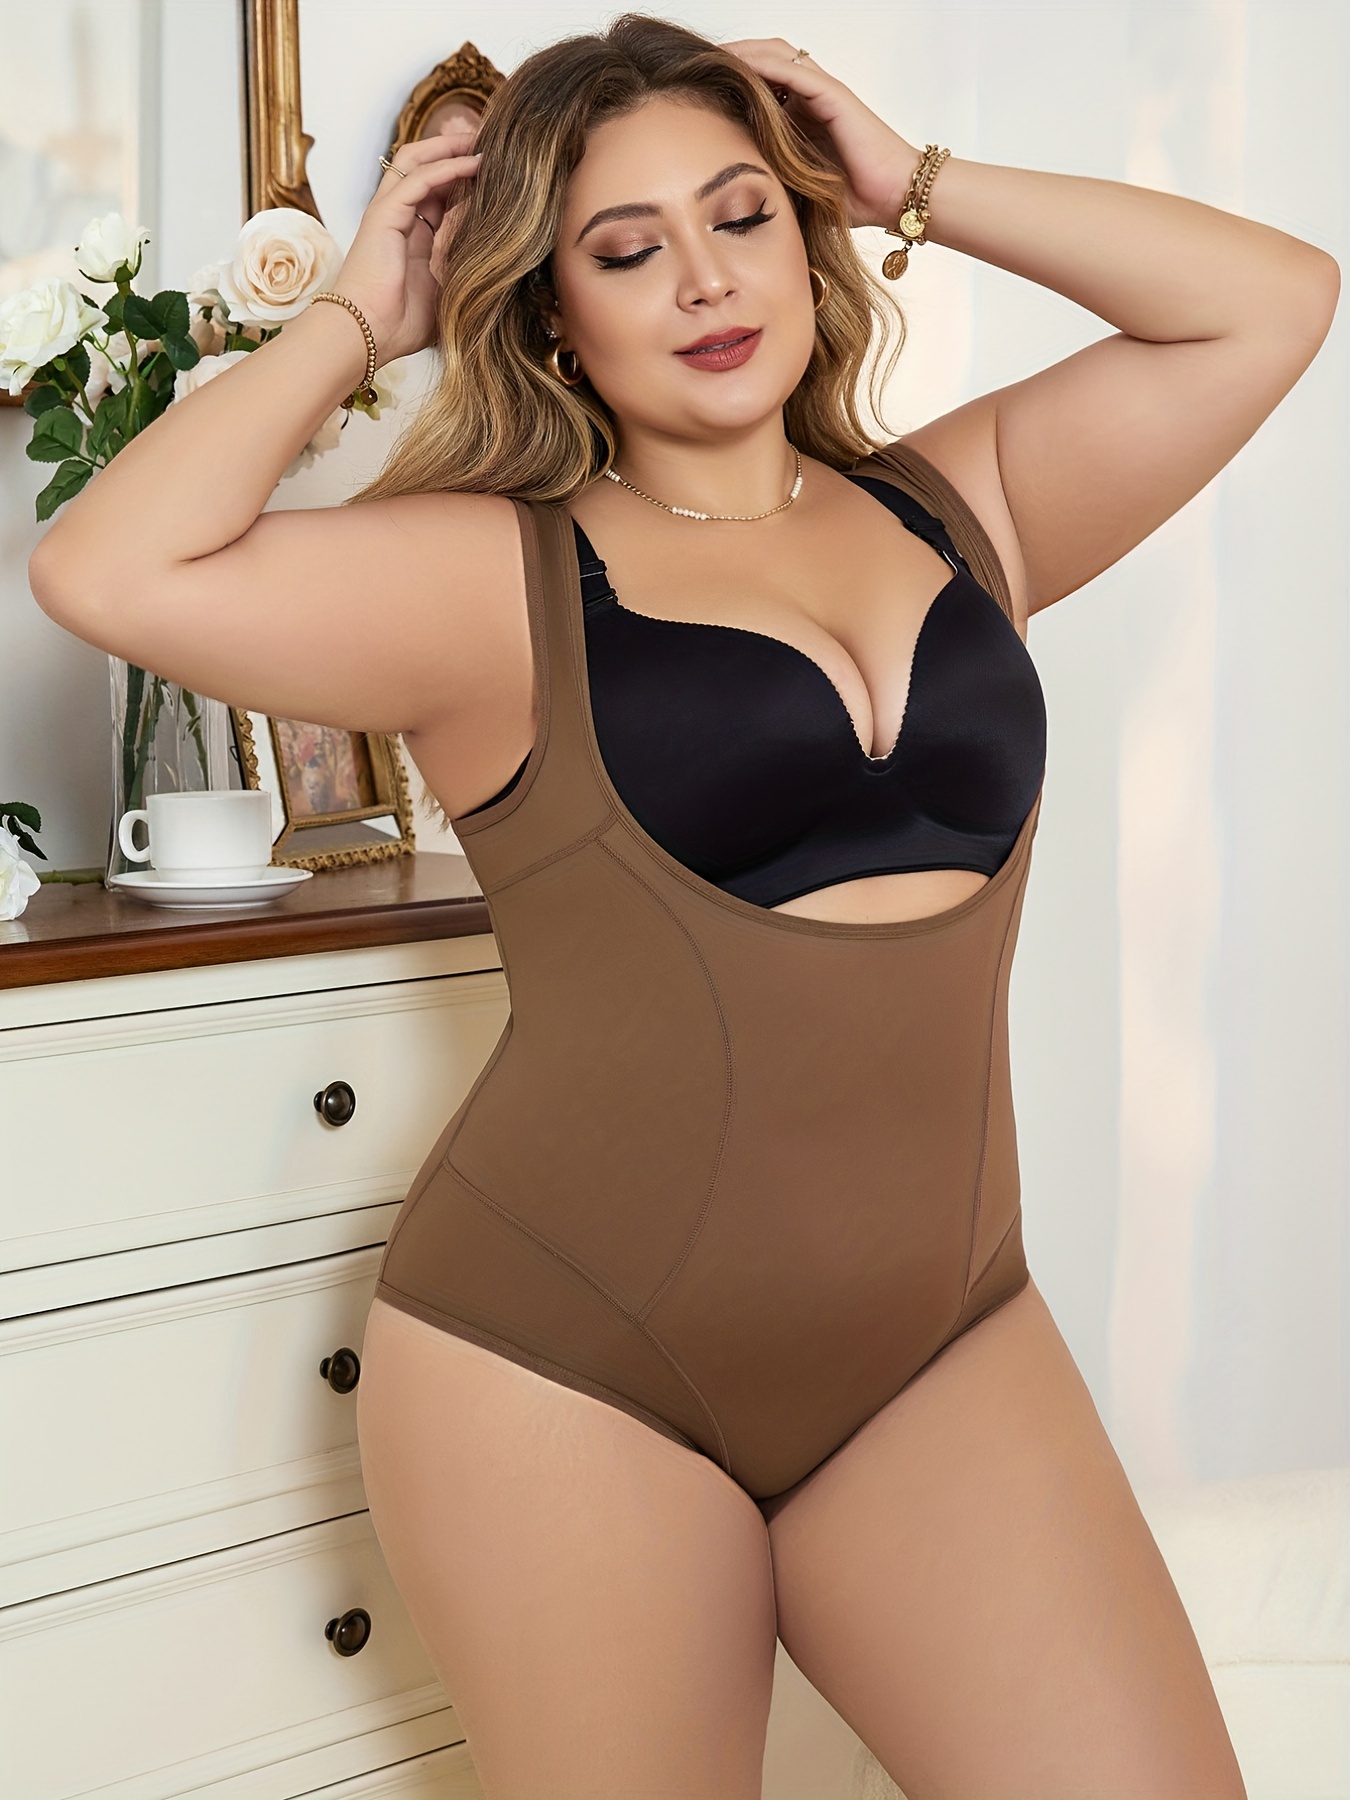 Aueoeo Plus Size Corset Top, Corset Shapewear Women Sexy Solid